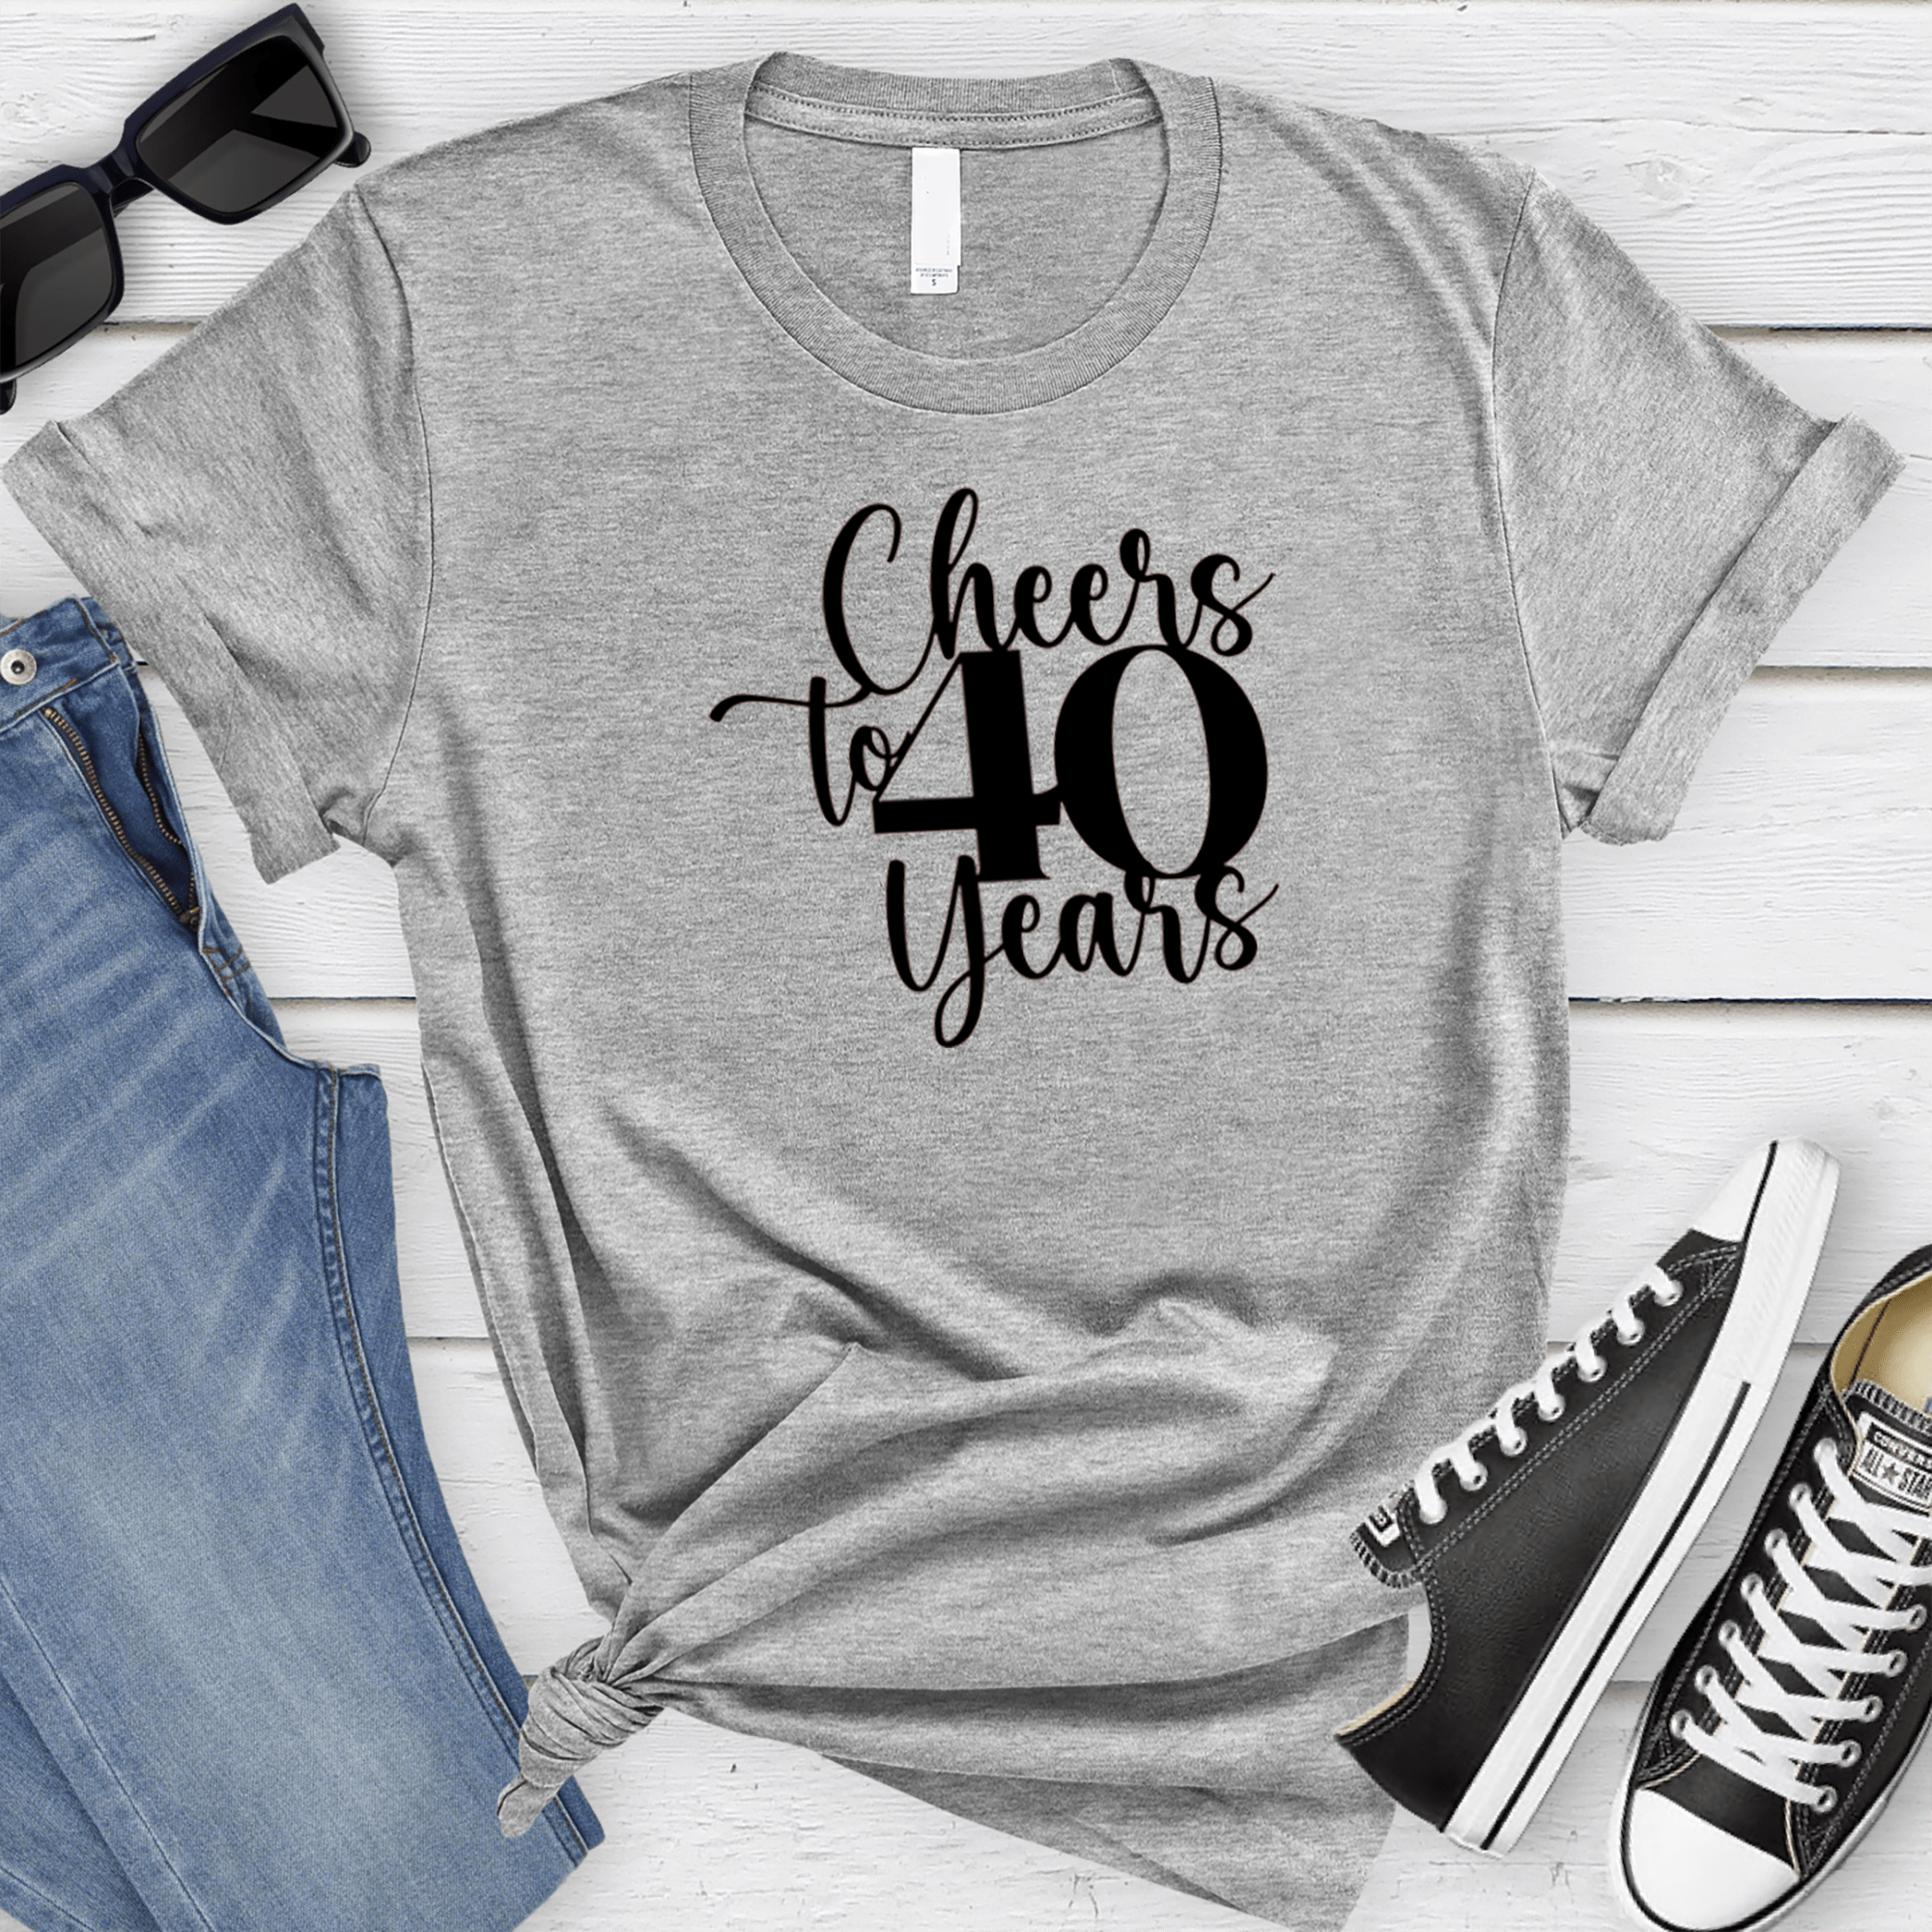 Womens Grey T Shirt with Cheers-To-Fourty-Years design